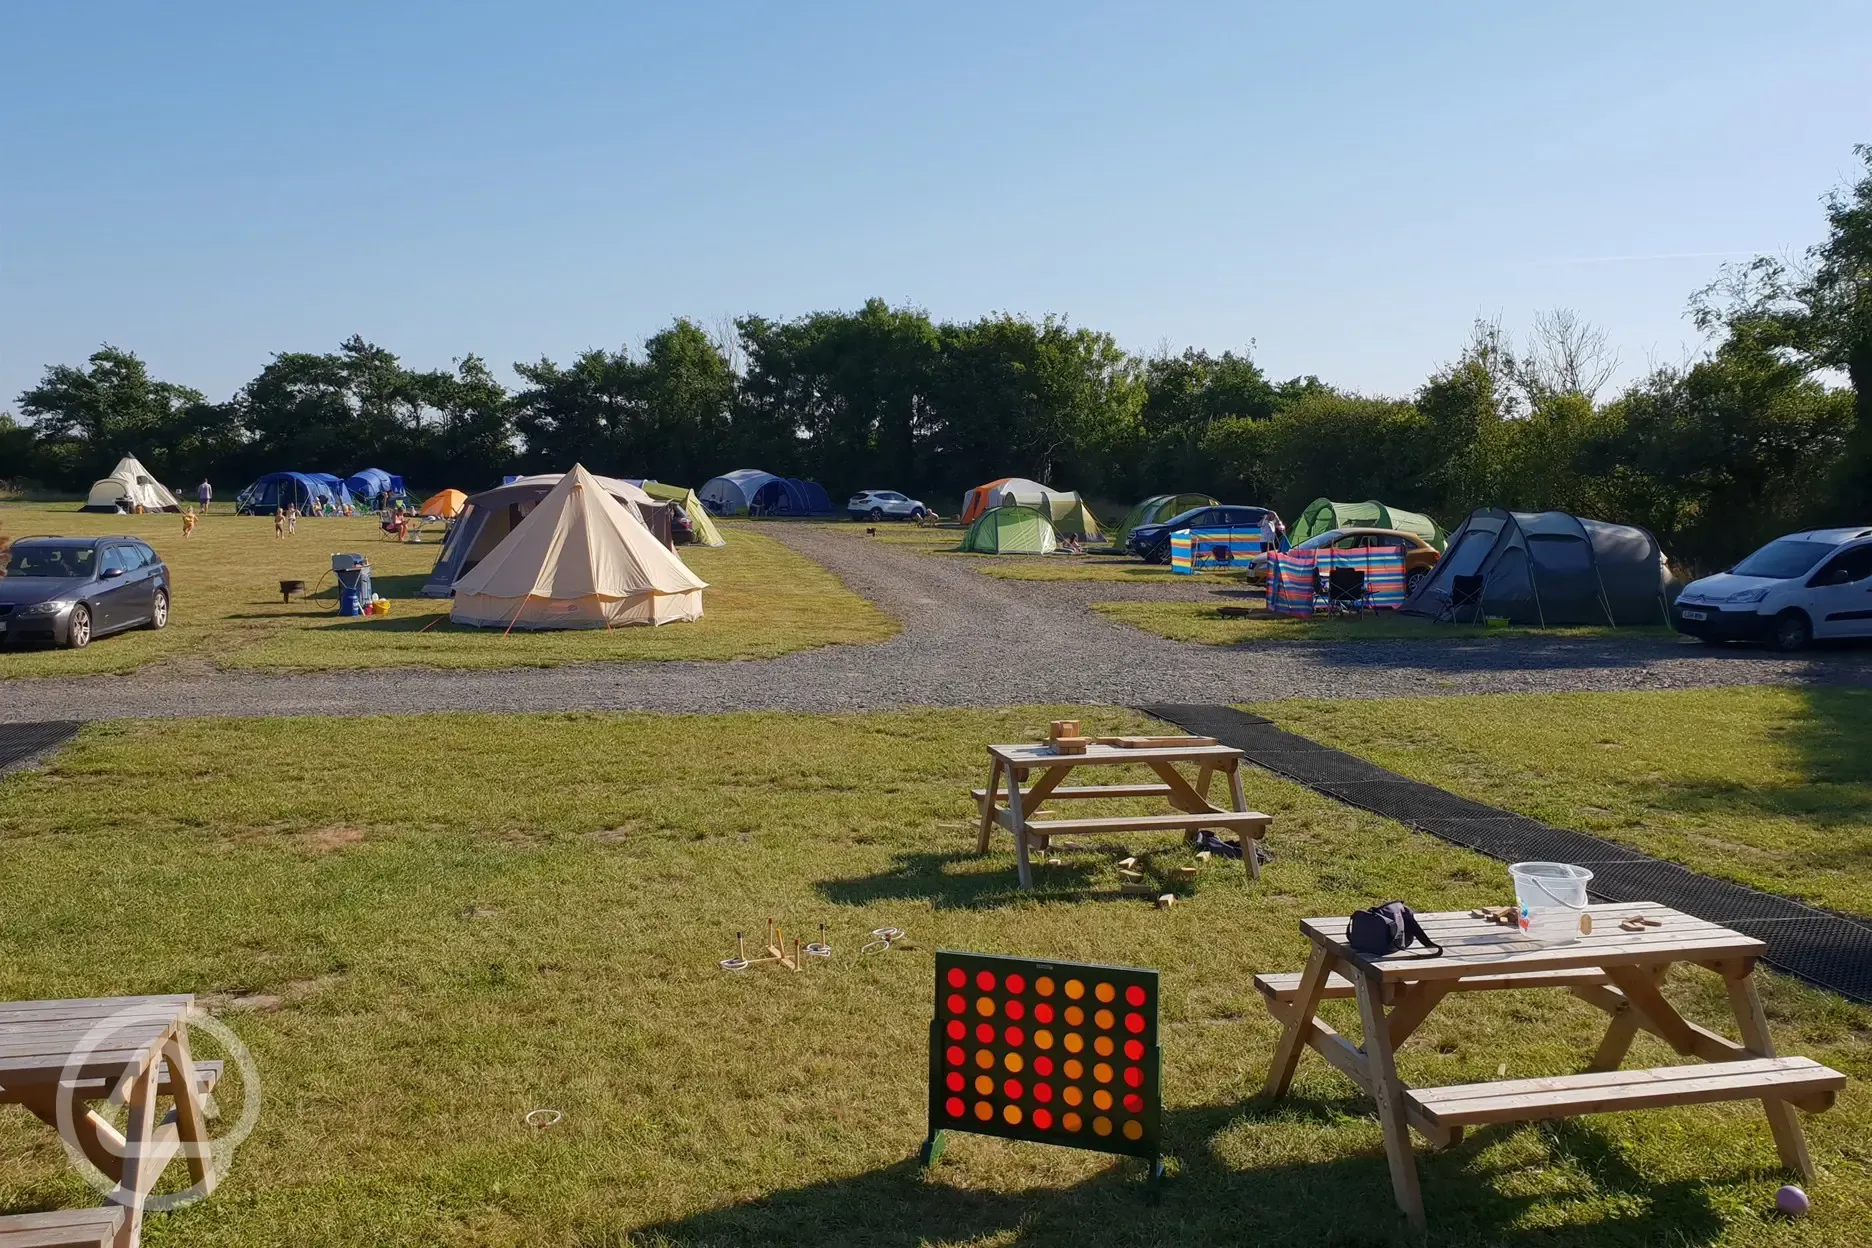 Non electric grass tent pitches and games area